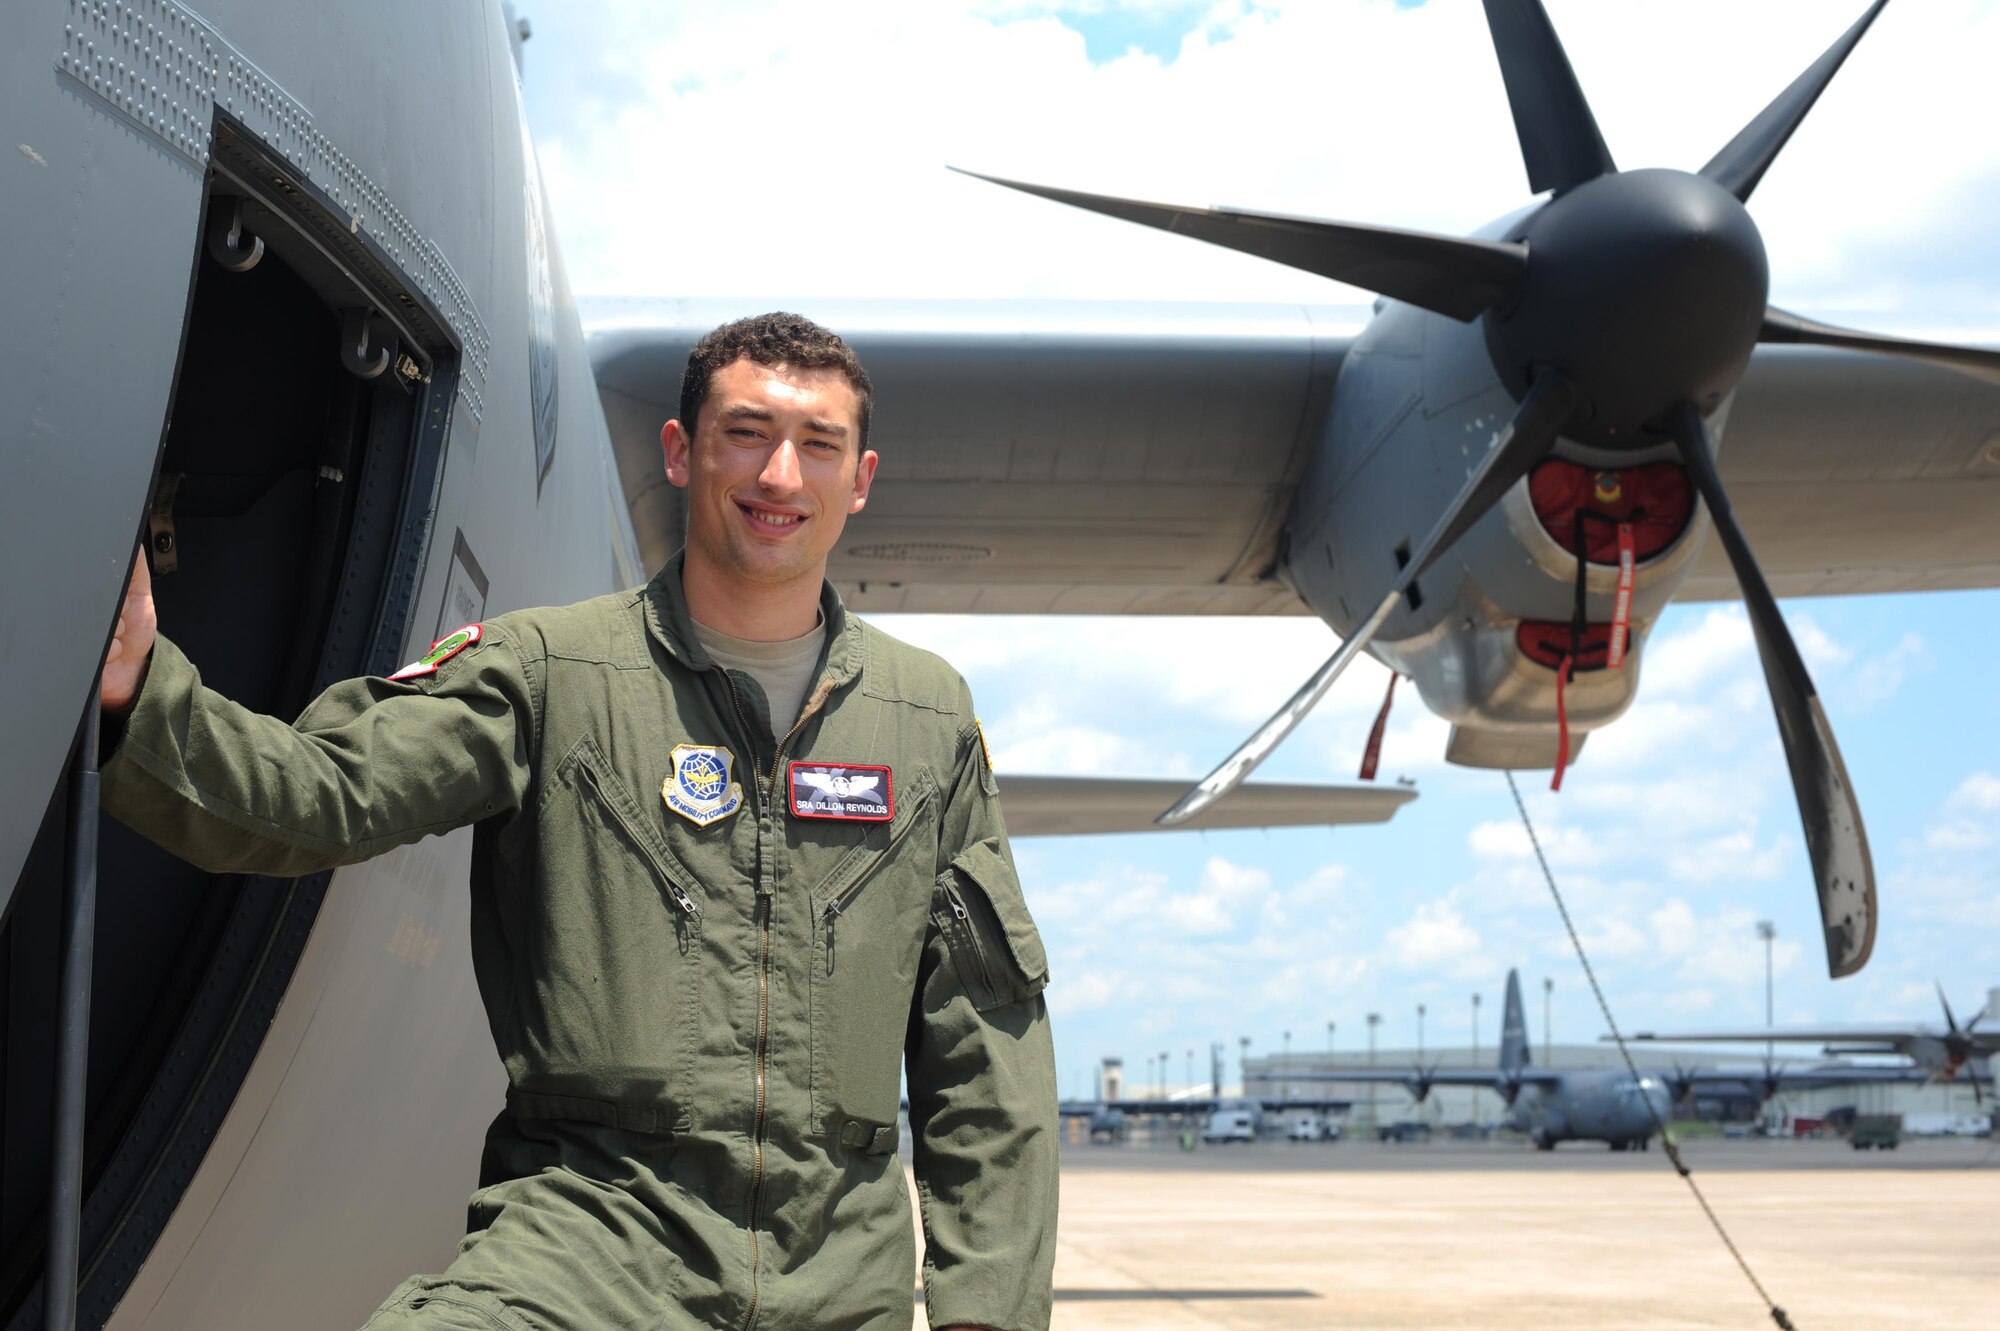 Senior Airman Dillon Reynolds, 41st Airlift Squadron C-130J instructor loadmaster, is nominated for the Combat Airlifter of the Week July 7, 2017, at Little Rock Air Force Base, Ark. Reynolds was selected for his efforts during a humanitarian relief mission in Peru. (U.S. Air Force photo by Airman 1st Class Grace Nichols)